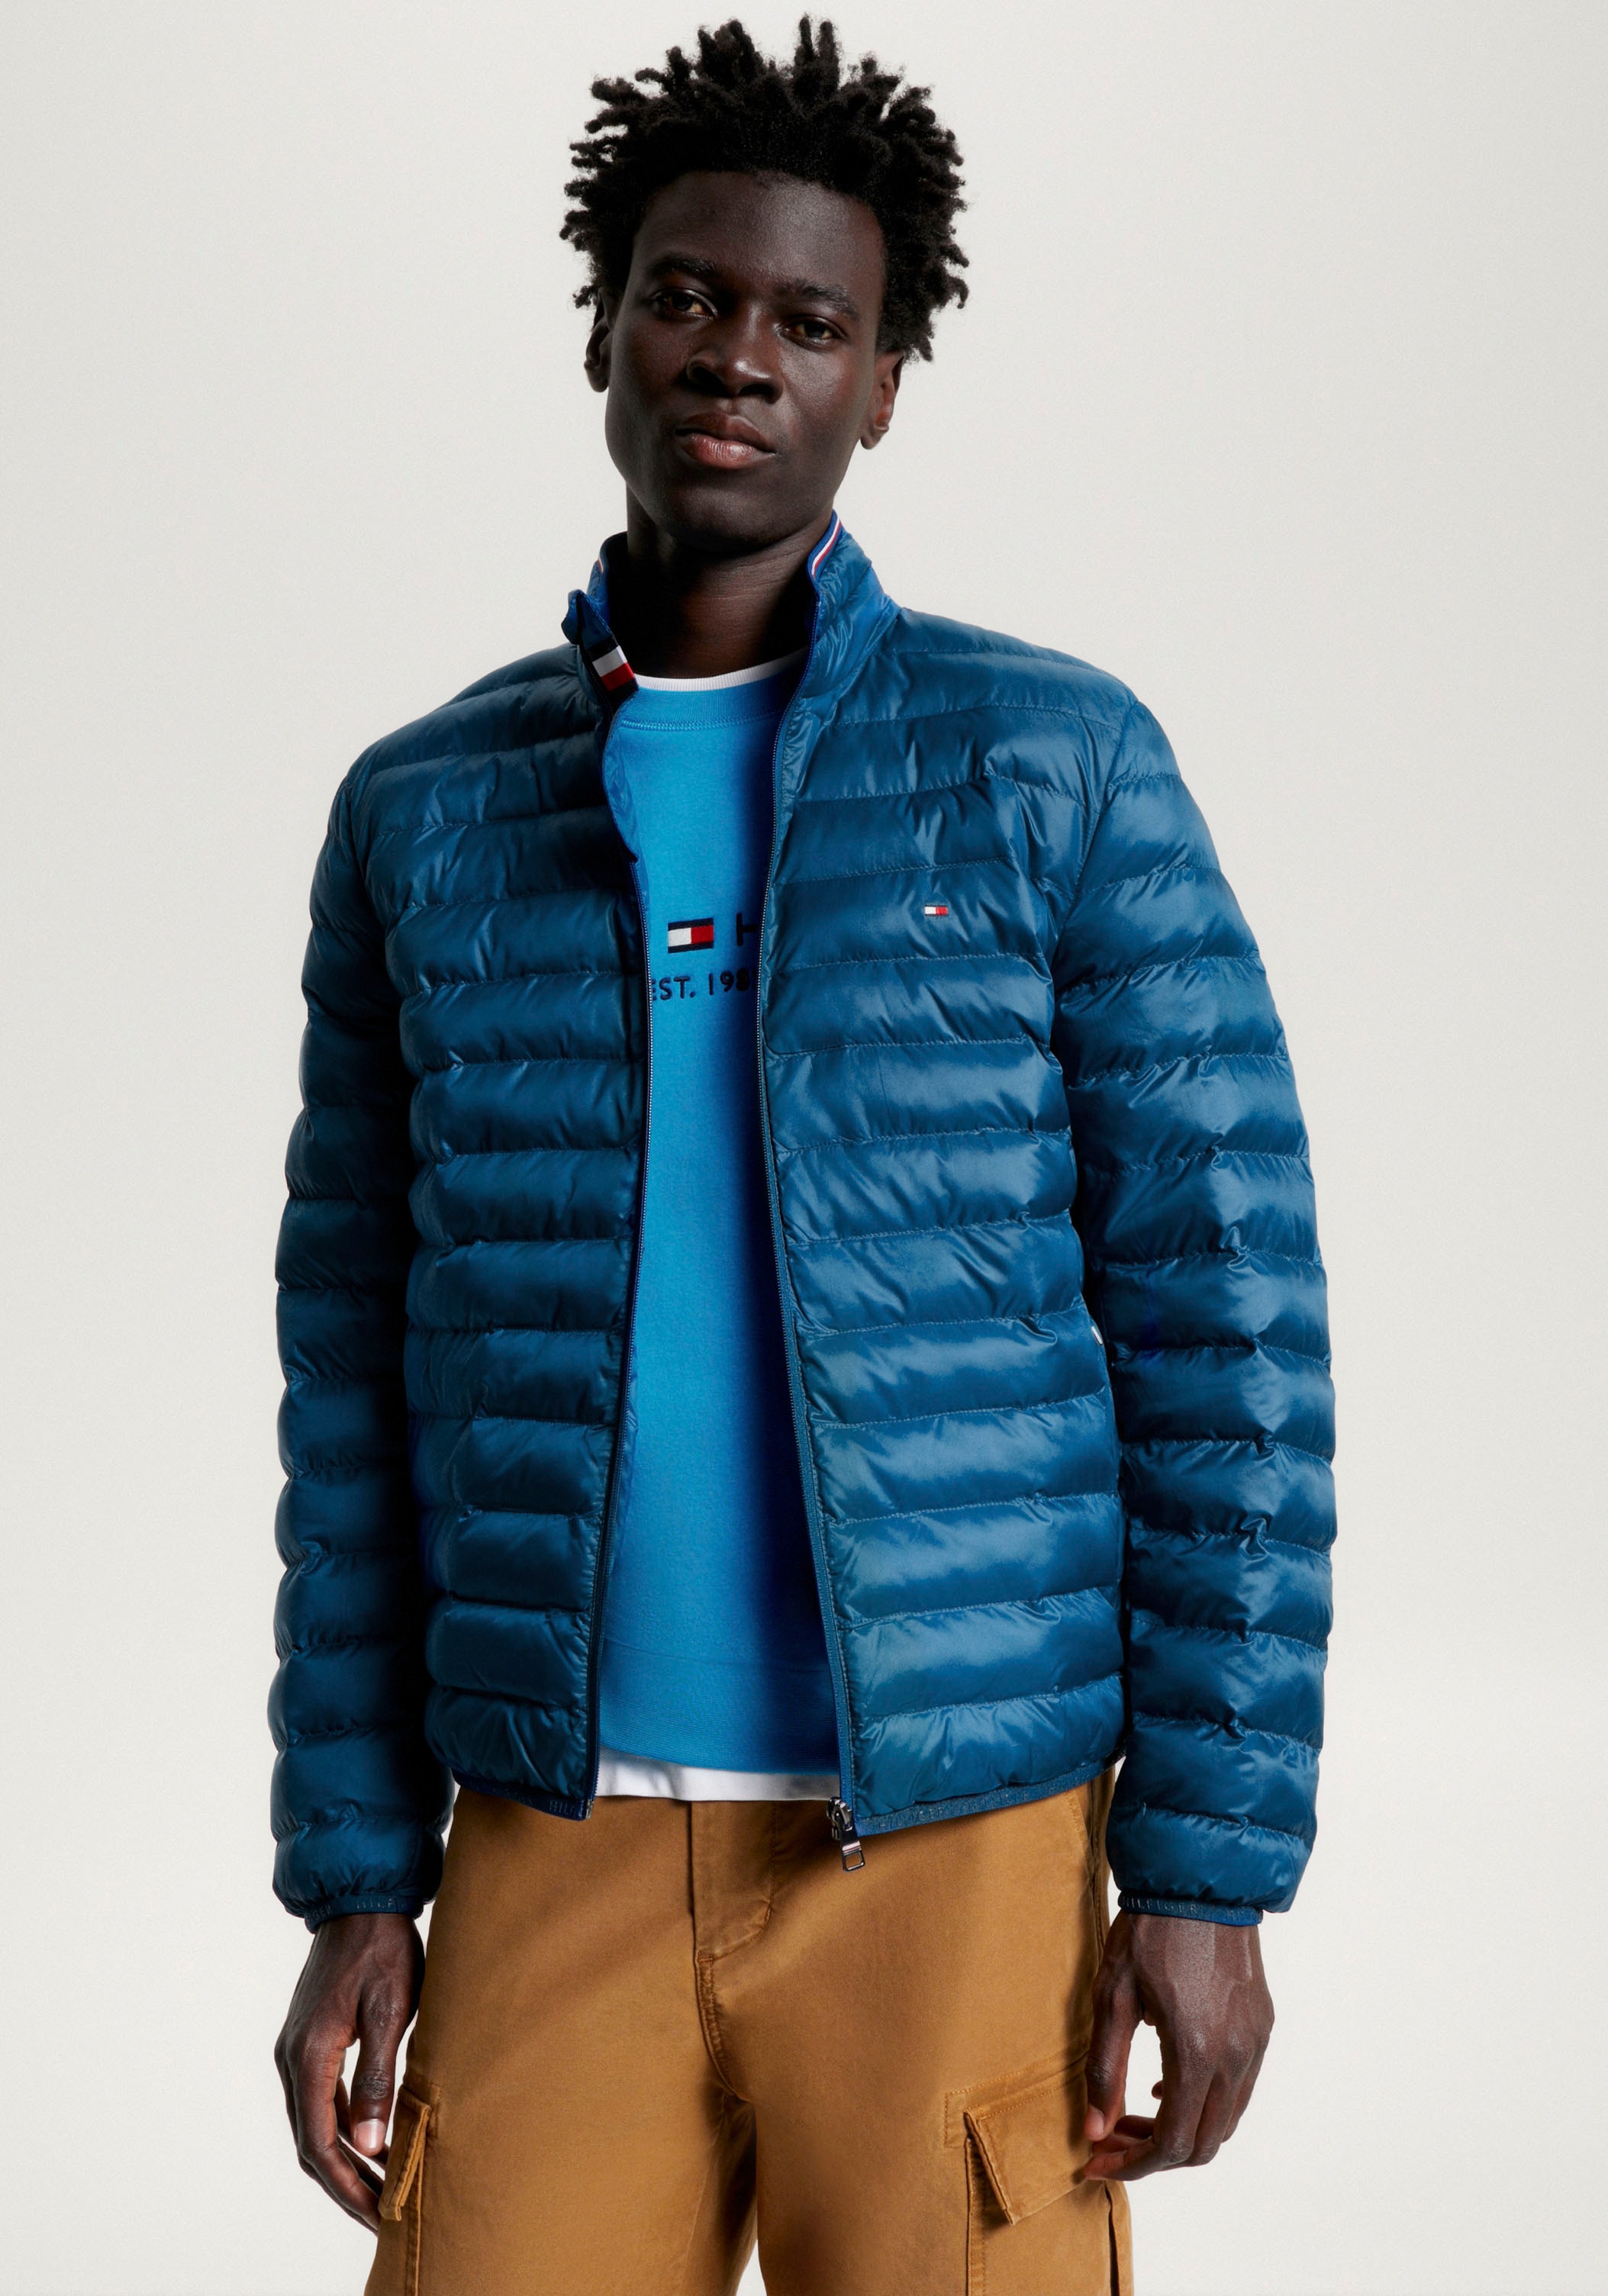 »PACKABLE OTTO RECYCLED bei Hilfiger kaufen Steppjacke Tommy JACKET,«